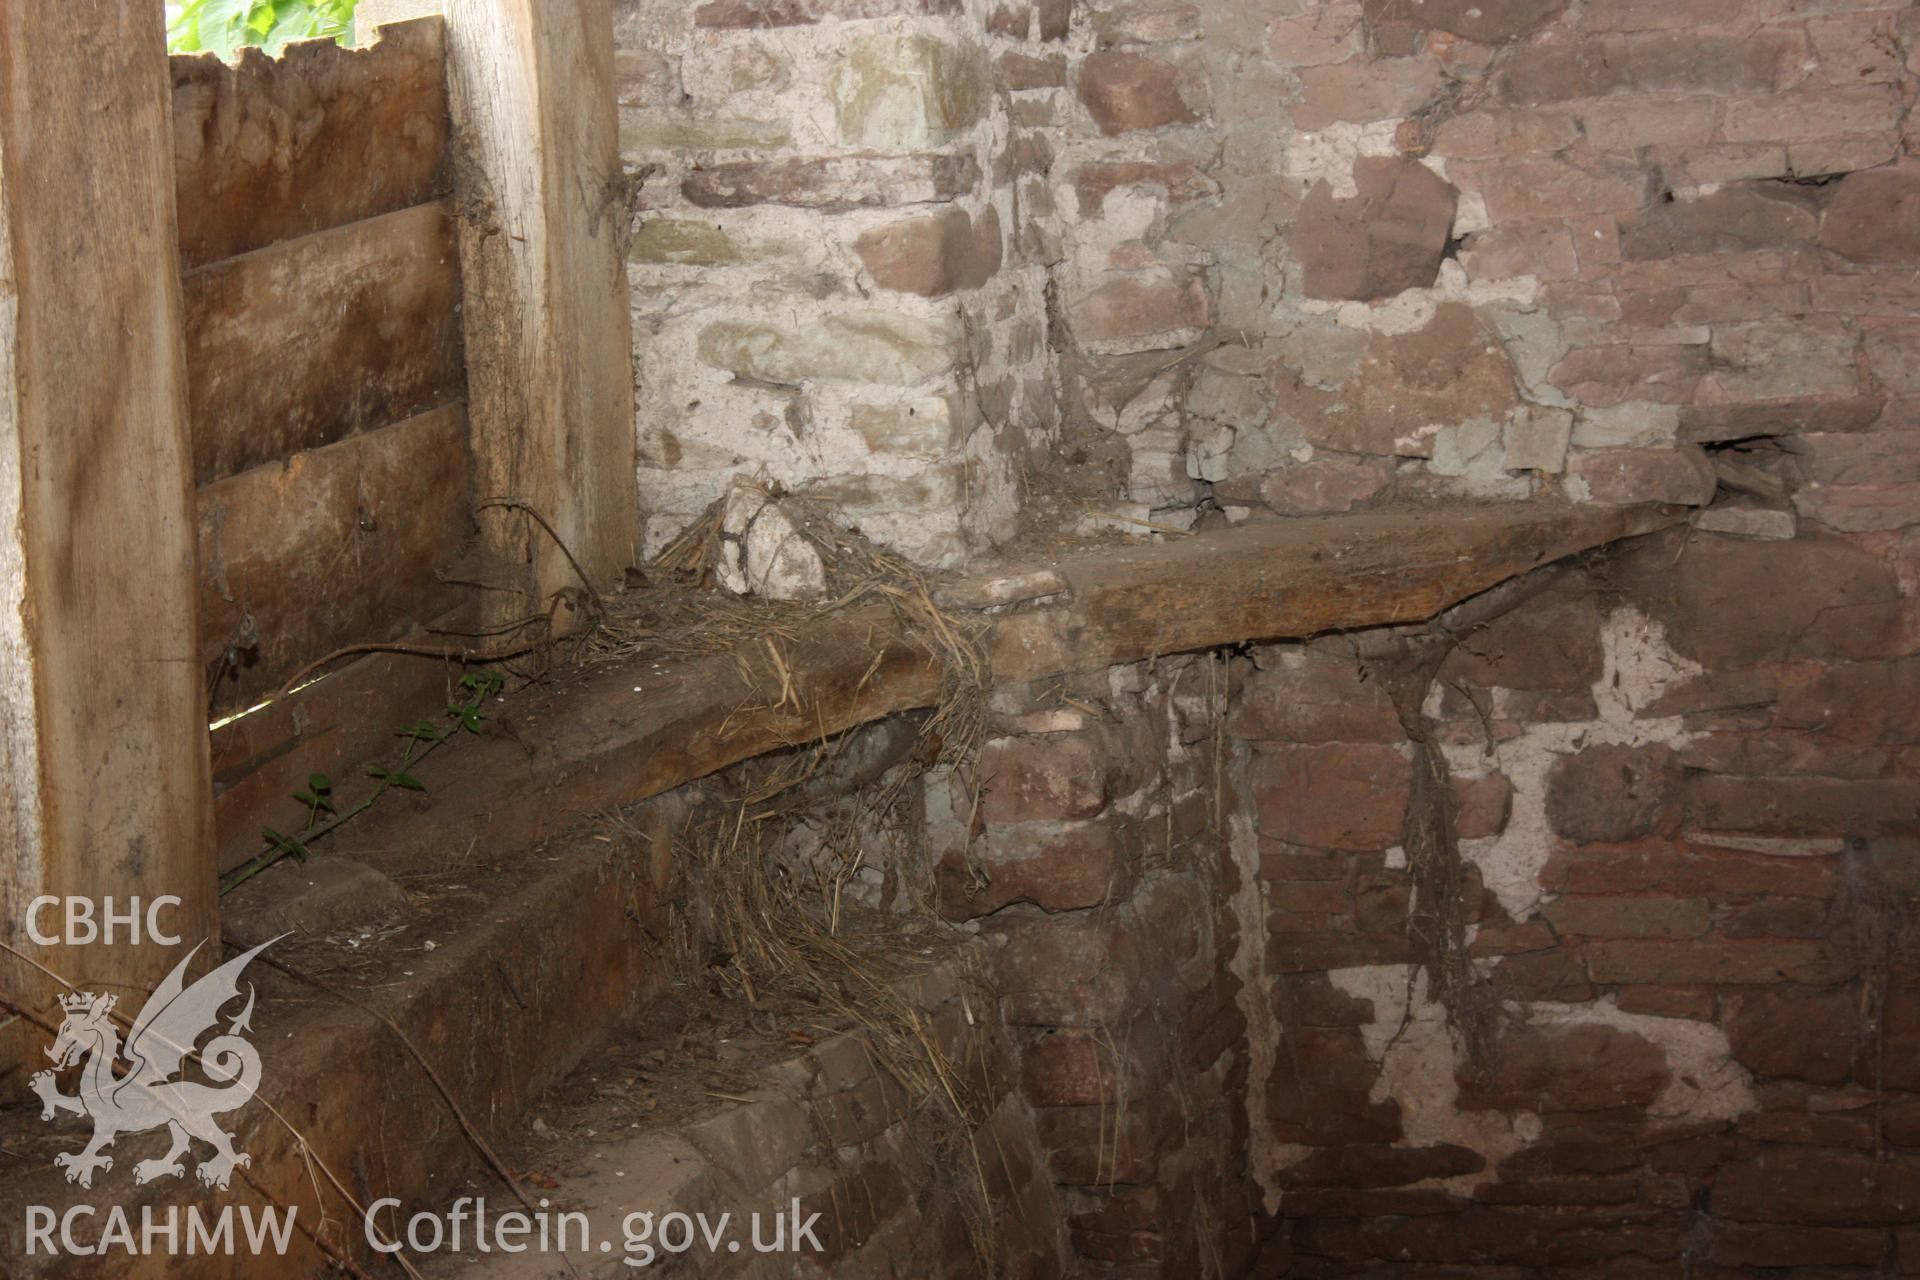 Internal wooden panelling and brick wall. Photographic survey of Marian Mawr in Cwm, Denbighshire by Geoff Ward on 20th August 2010.